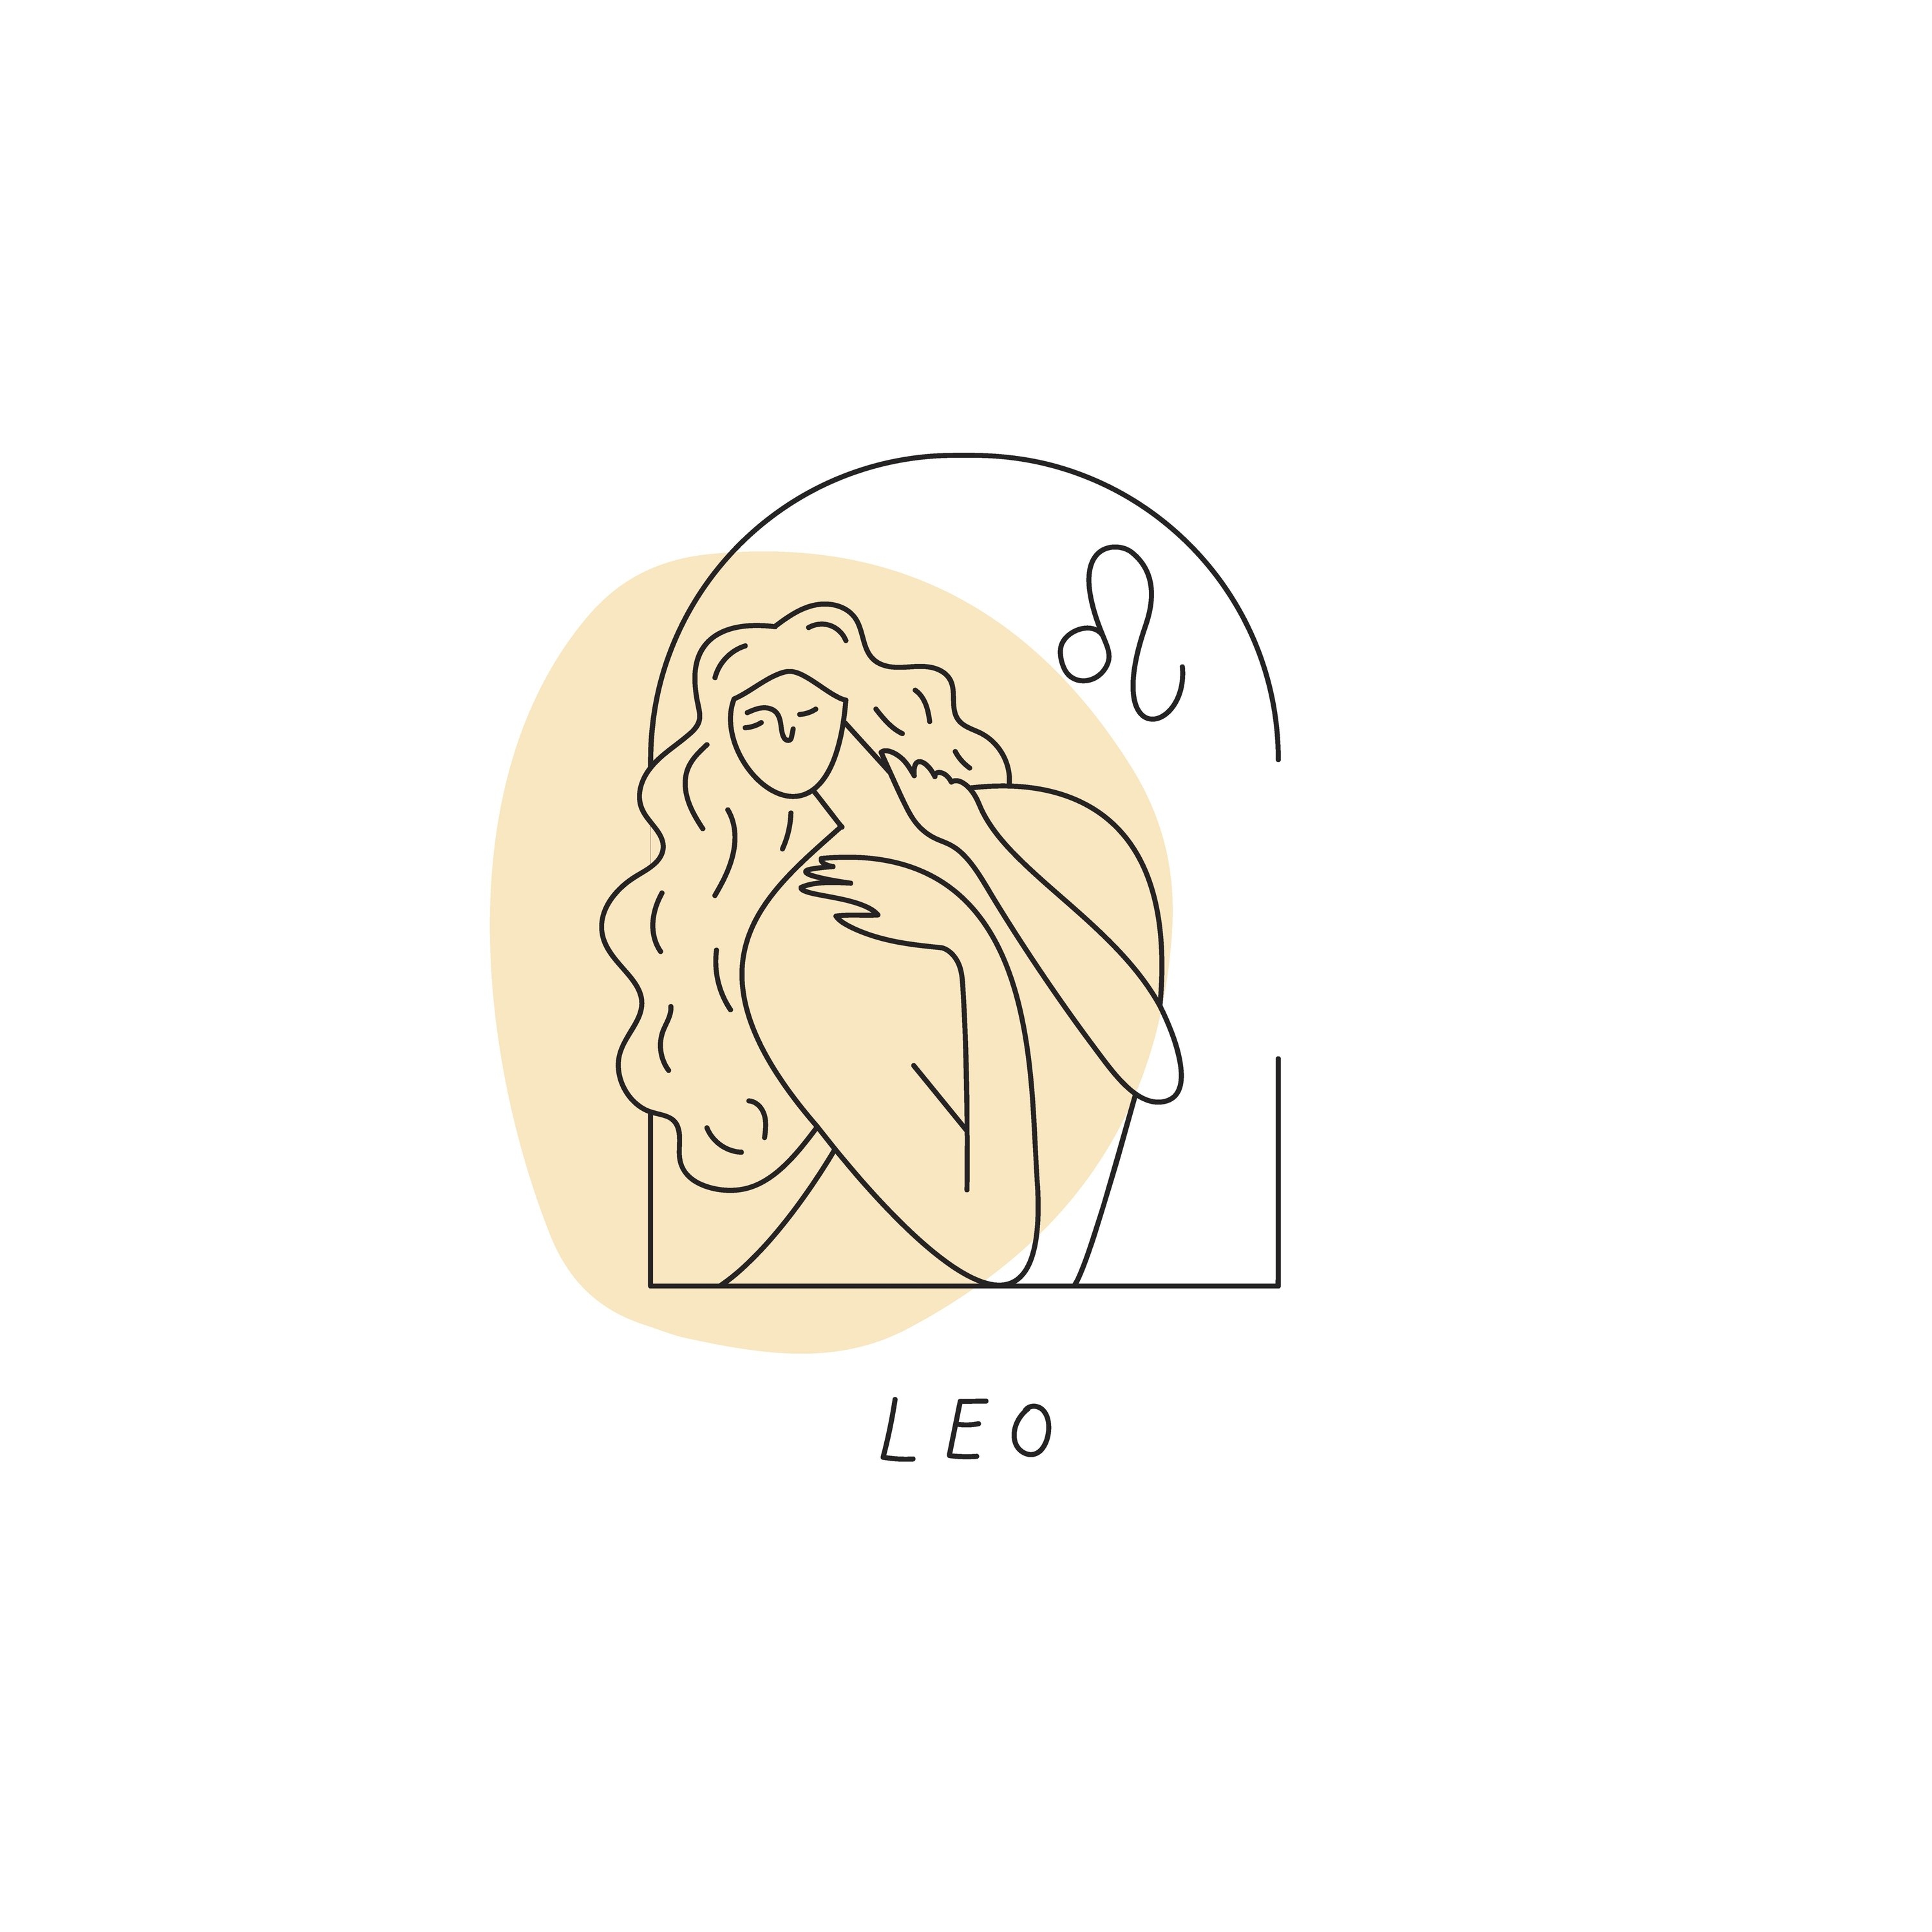 Leo zodiac sign illustration with yellow watercolor